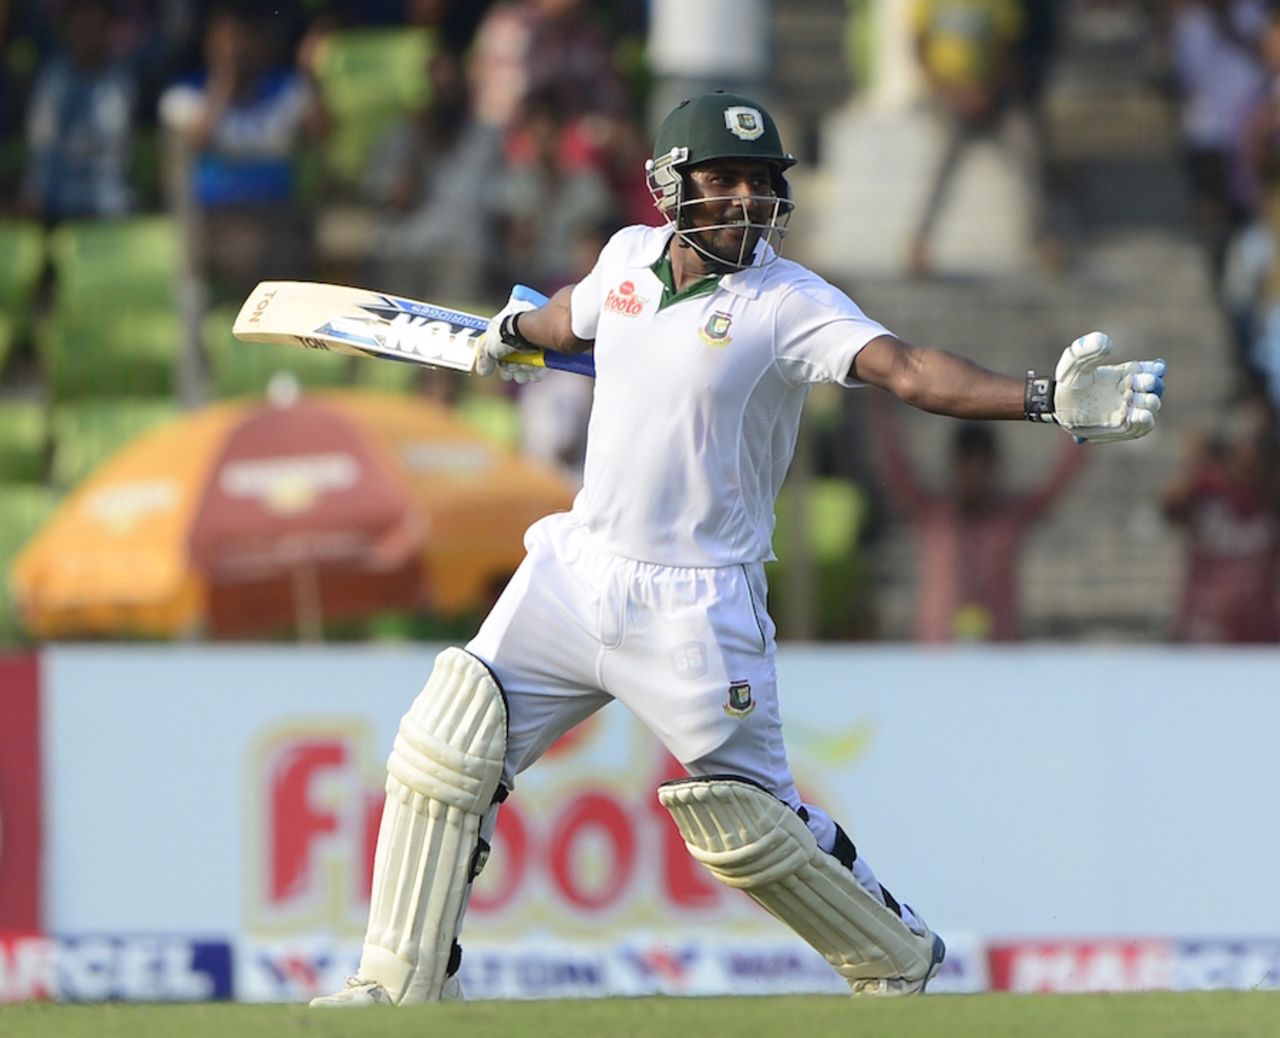 Imrul Kayes is ecstatic on reaching his third Test century, Bangladesh v Pakistan, 1st Test, Khulna, 4th day, May 1, 2015